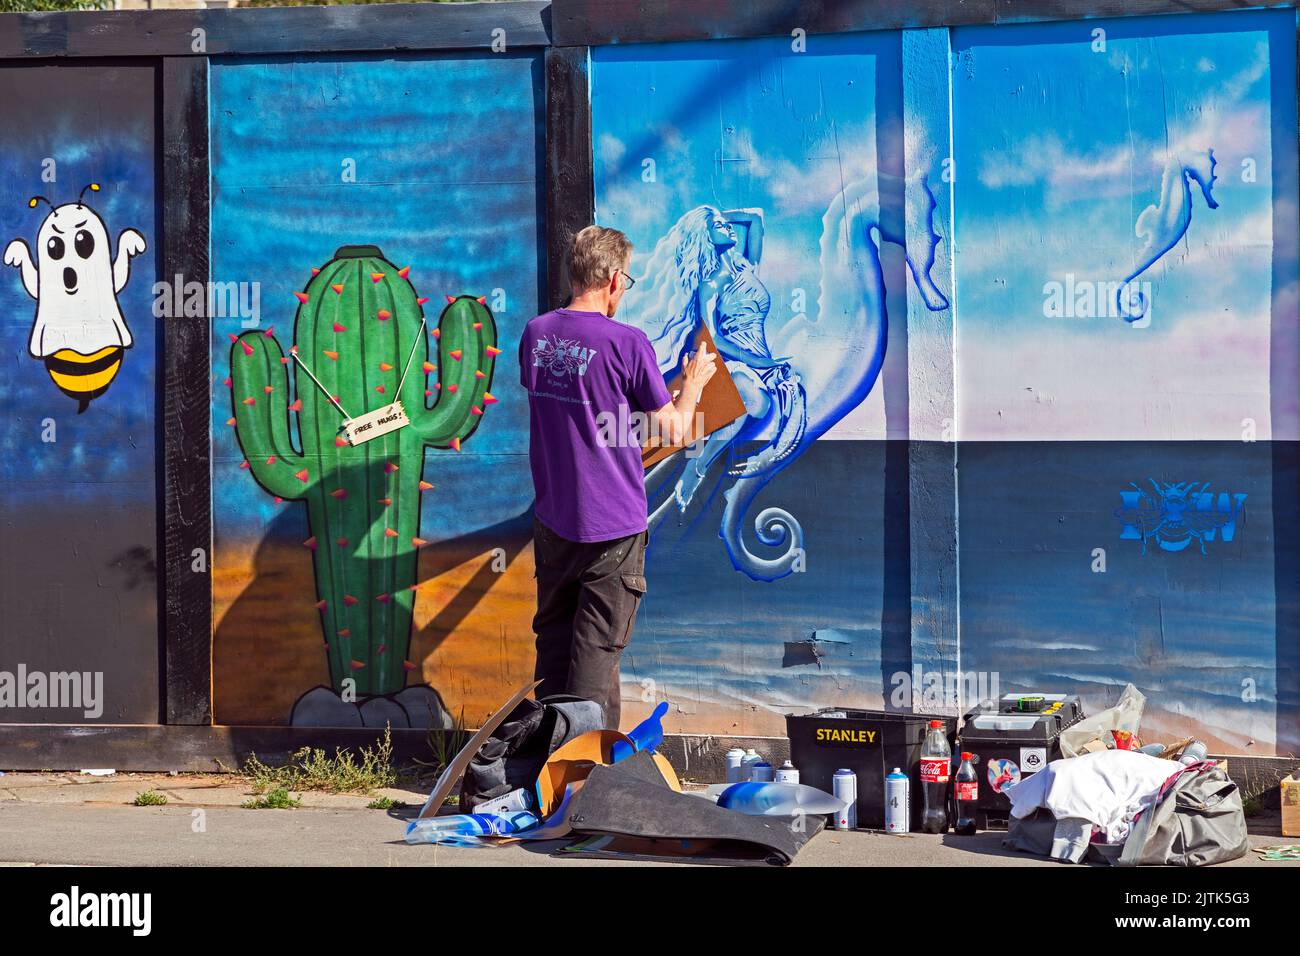 Weston-super-Mare, UK, 27 August 2022, Artist Ian Boyd Walker at work at a paint jam at the site of the town’s former police station. The police station was demolished in 2019 and the site is awaiting redevelopment. Stock Photo